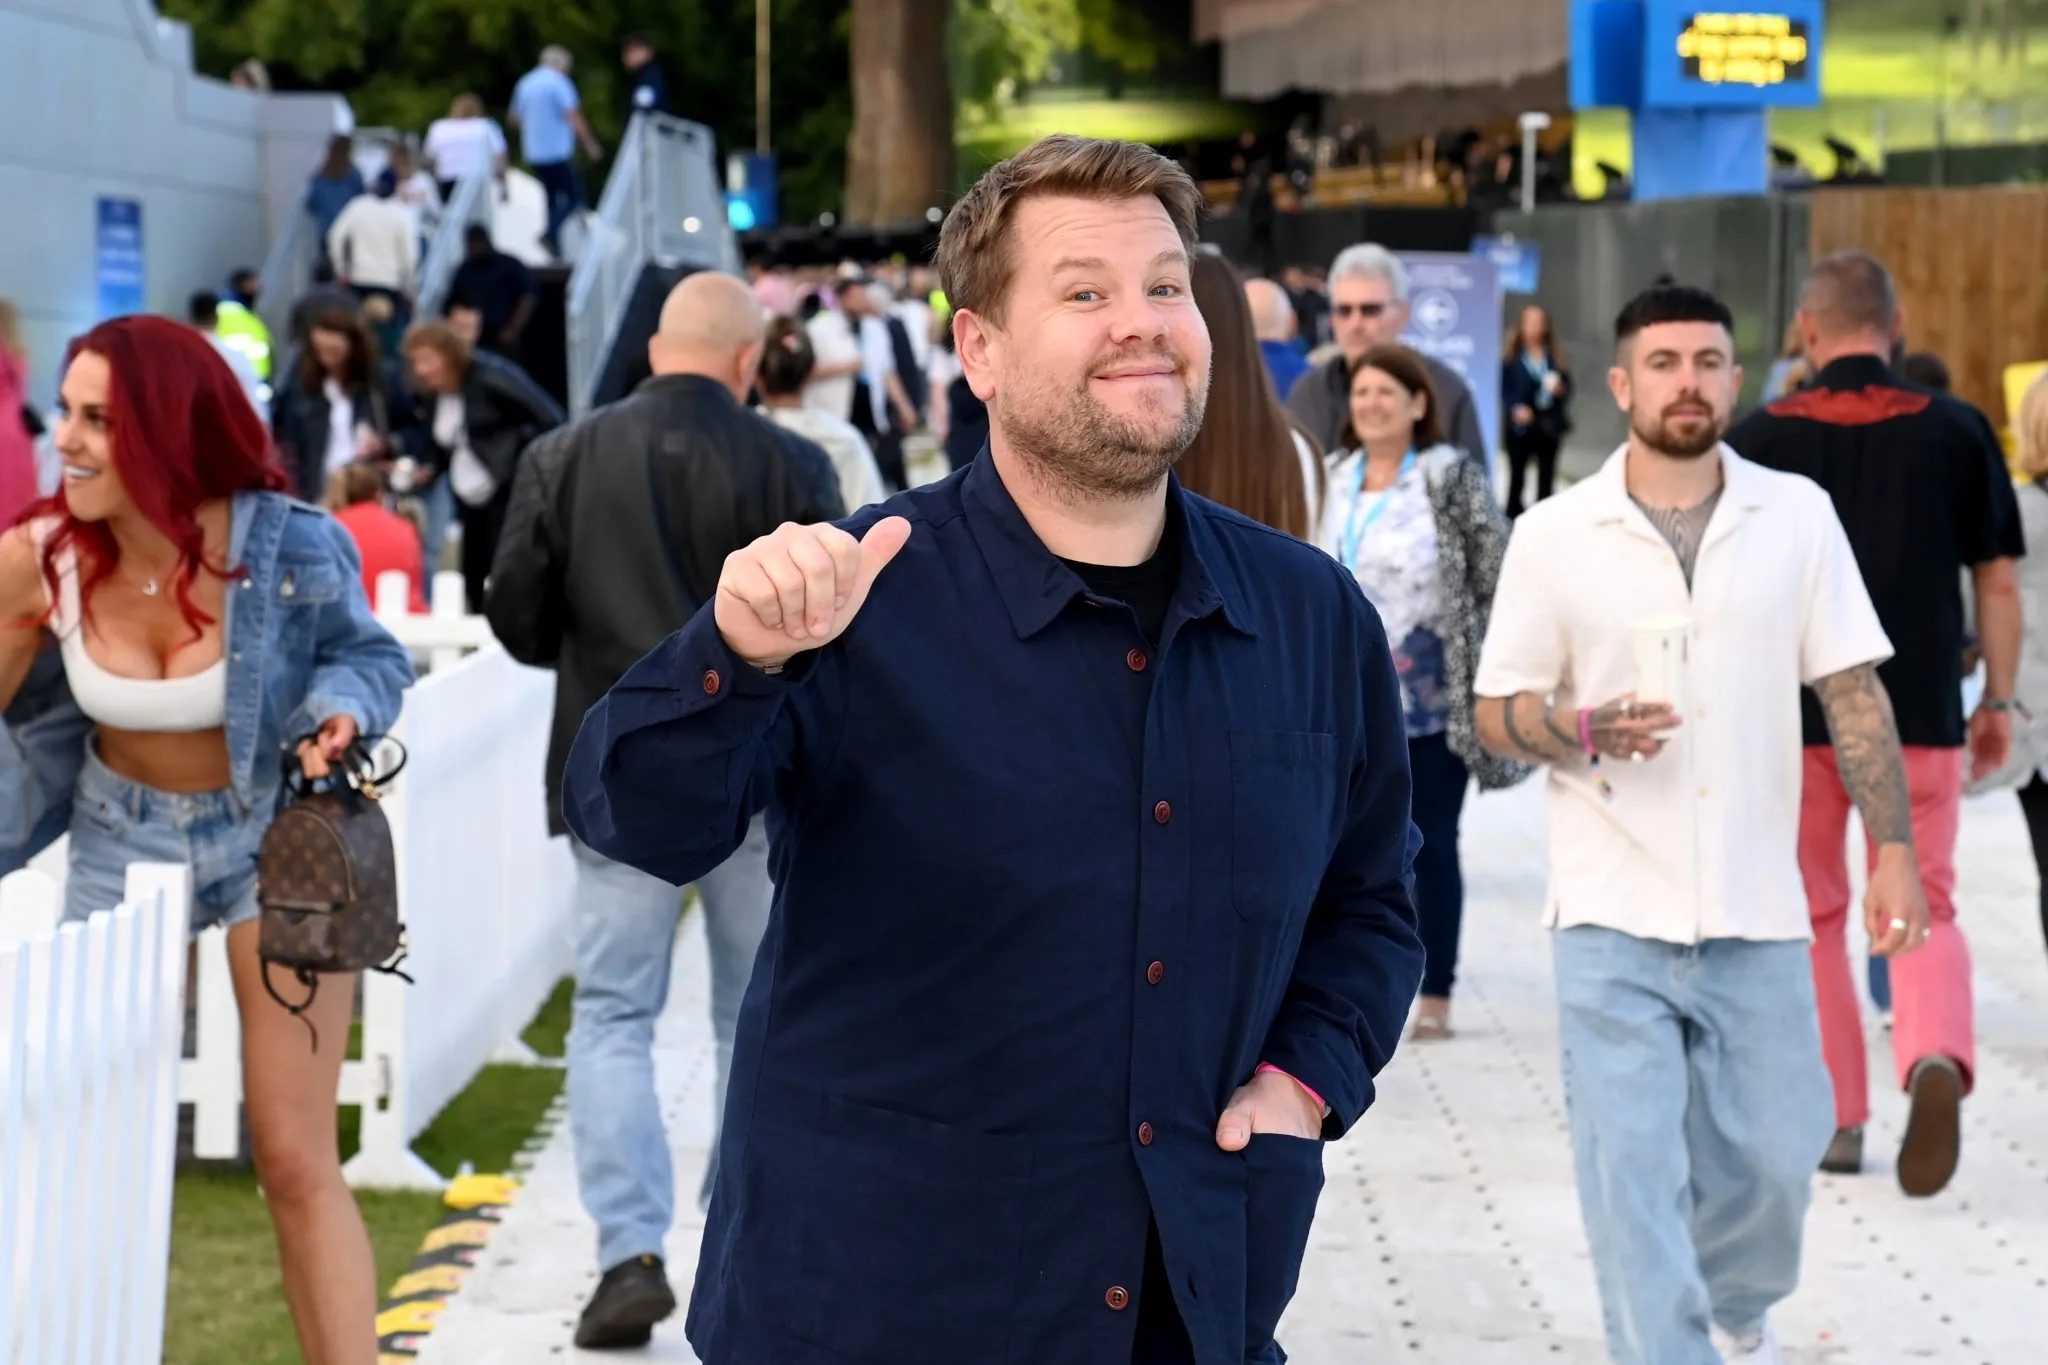 LONDON, UK - JULY 1: James Corden attends the American Express BST Hyde Park Awards at Hyde Park on July 1, 2022 in London, England.  (Photo by Dave J. Hogan/Getty Images)